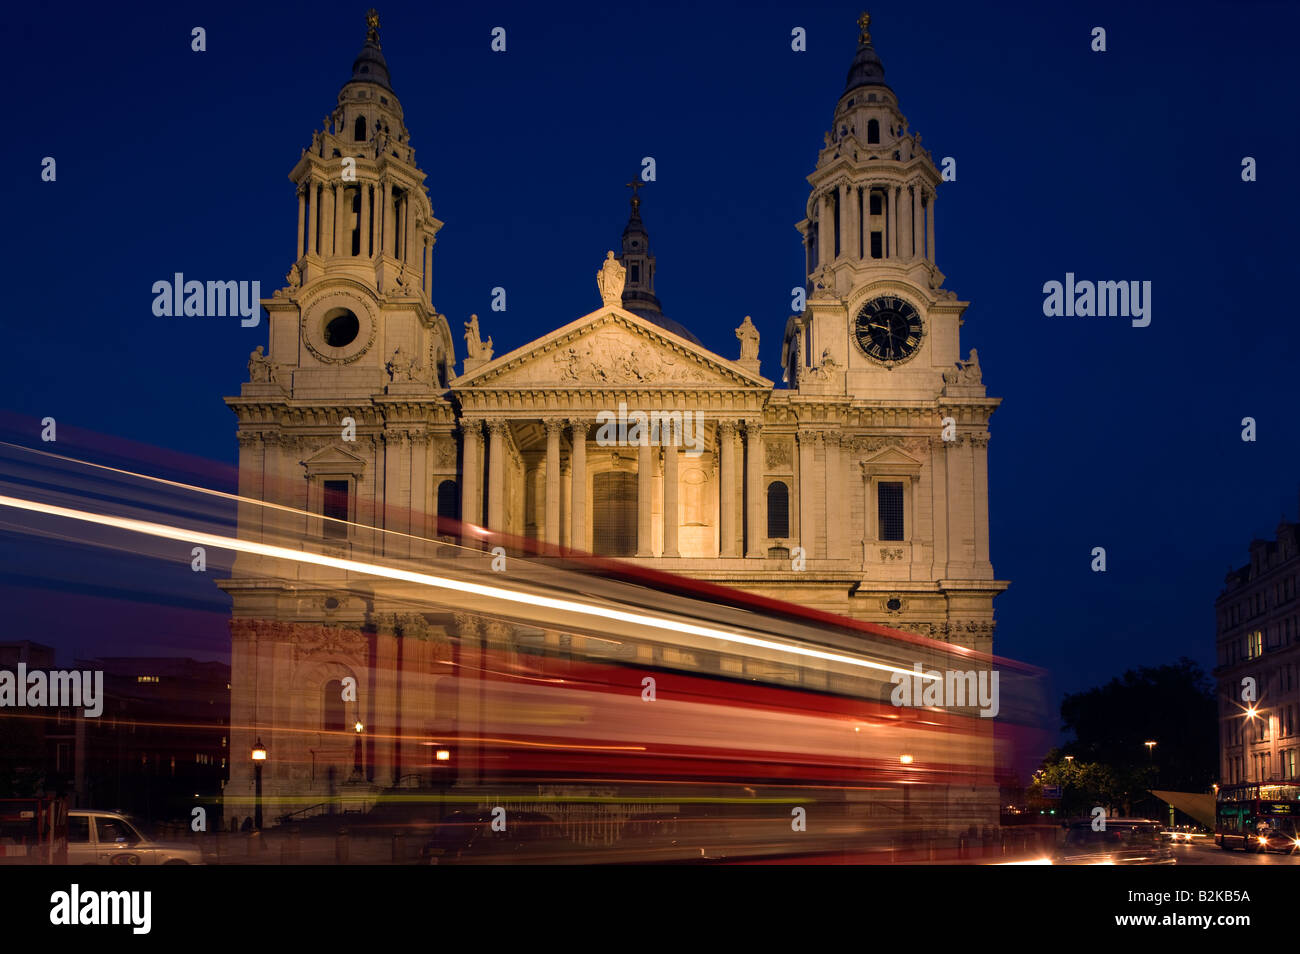 WEST FRONT SAINT PAULS CATHEDRAL LUDGATE HILL LONDON ENGLAND UK Stock Photo